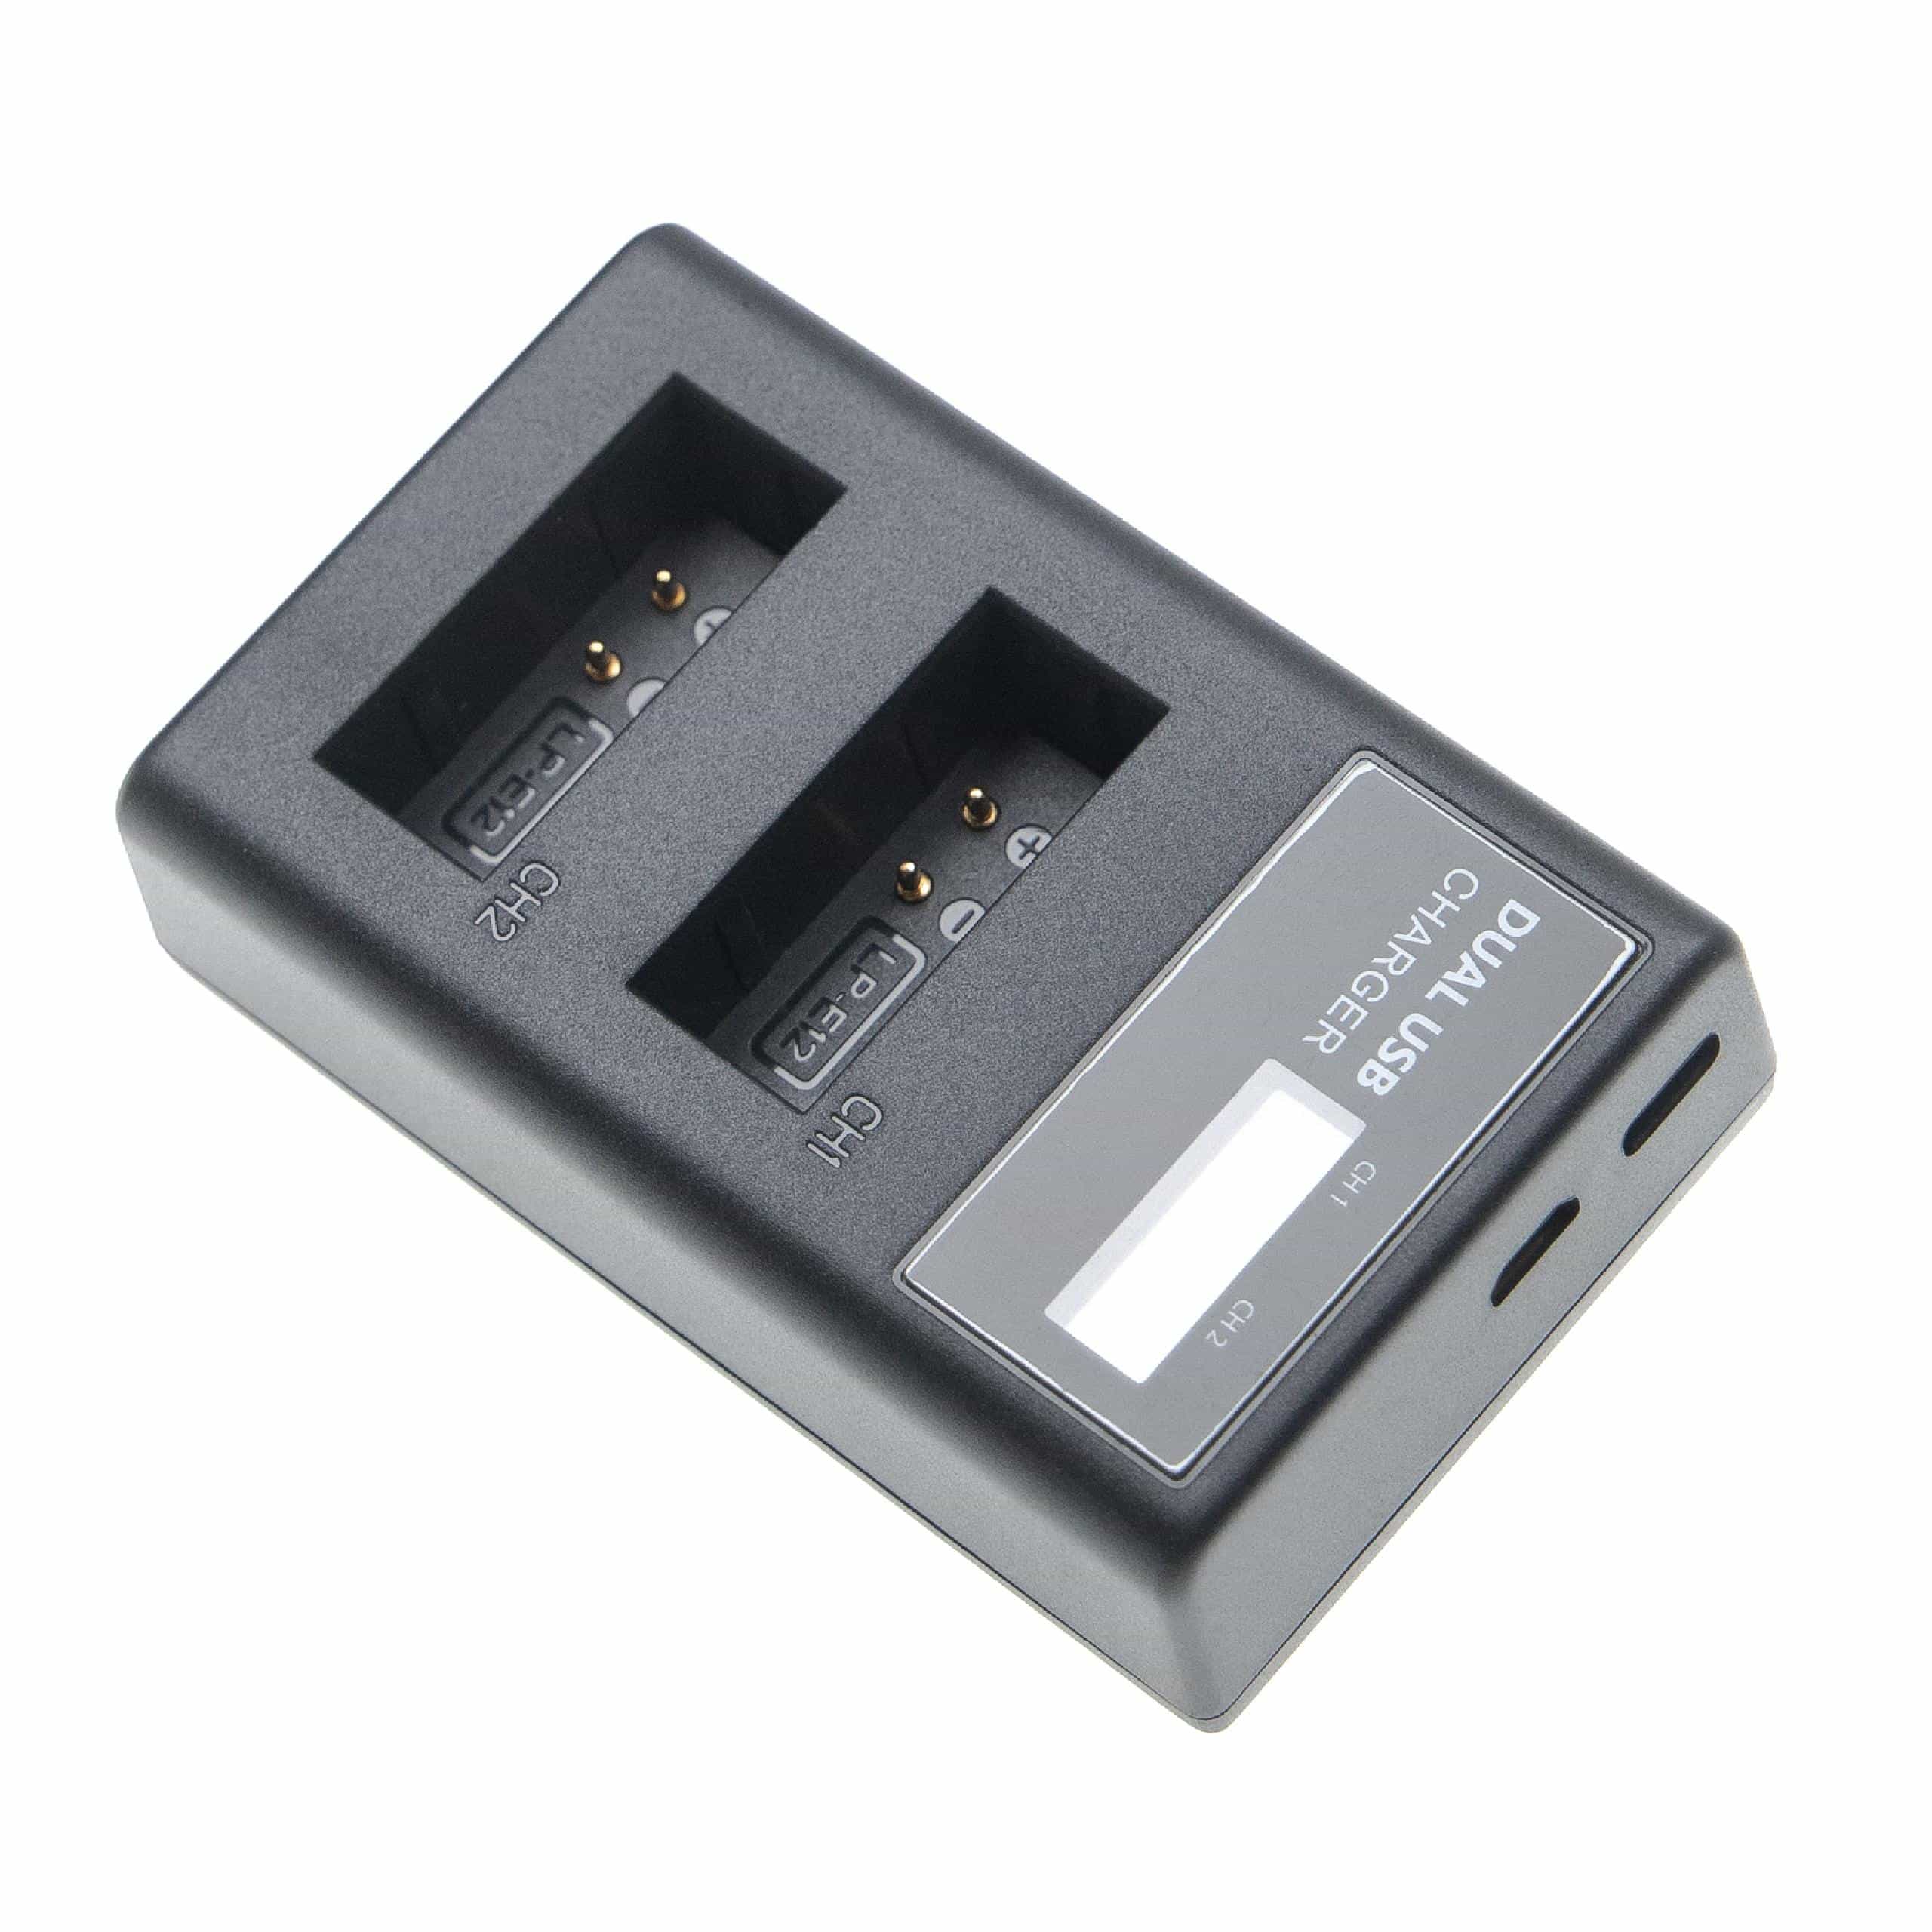 Battery Charger suitable for Canon LP-E12 Camera etc. - 0.5 A, 8.4 V